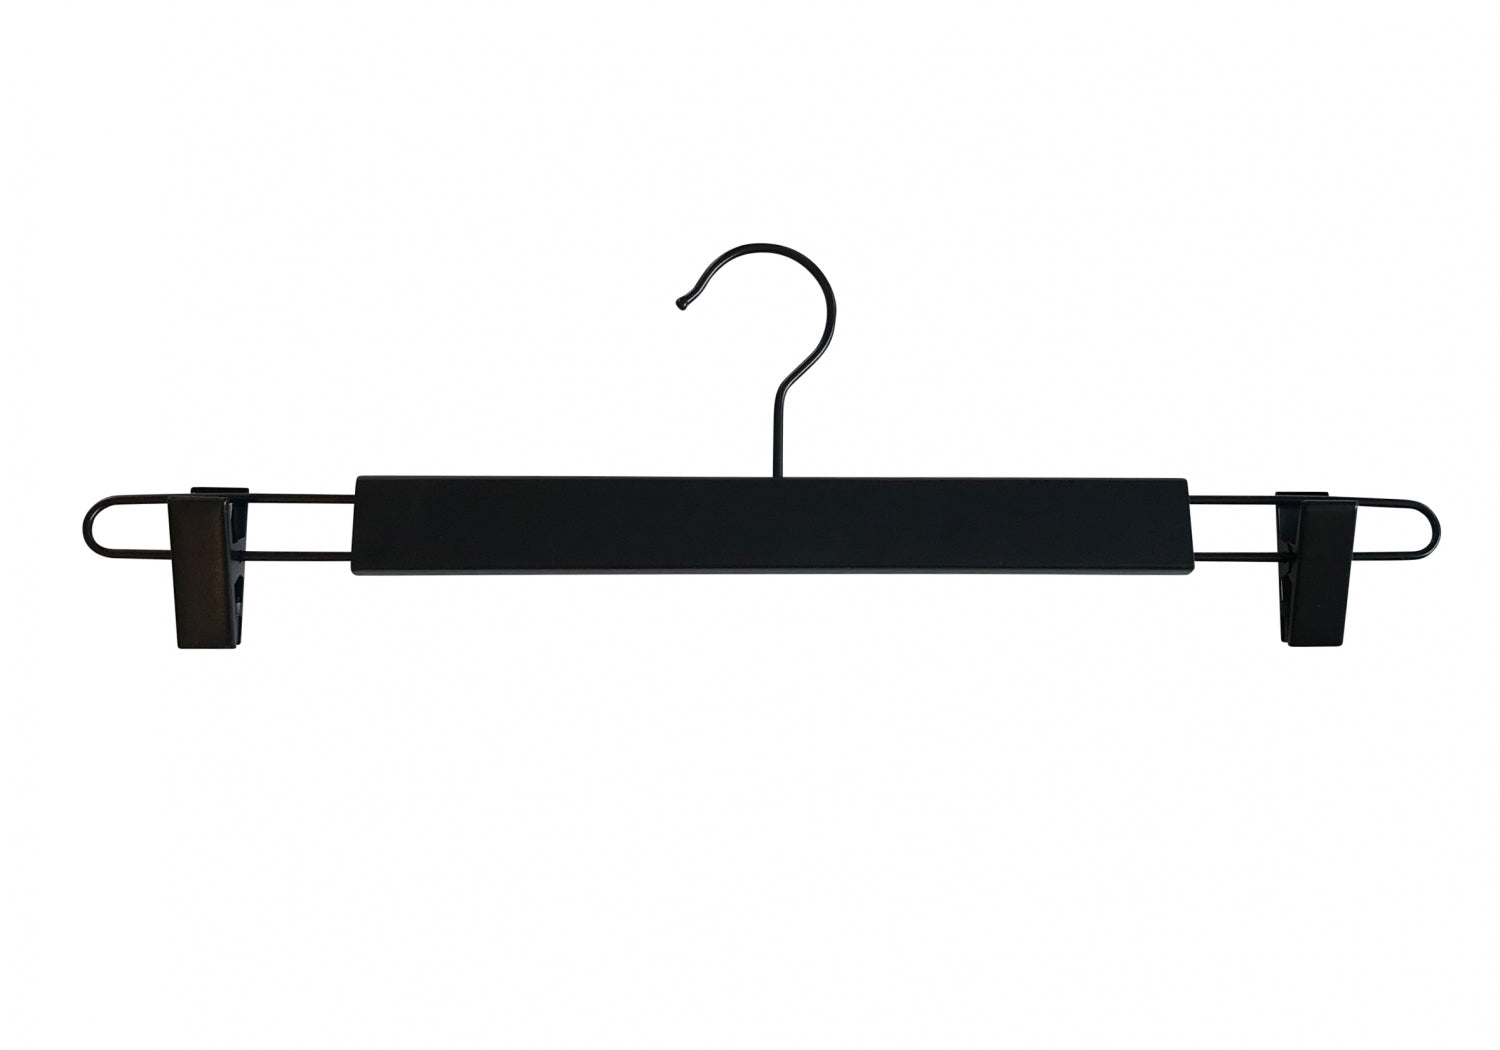 A Hangers of London Black Wooden Clip Bottom Hanger 37cm with sturdy clips on each end, designed for hanging pants or skirts. The hanger features a central bar with adjustable clips and a 360-degree rotation hook at the top for easy closet organization. The image is set against a plain white background.